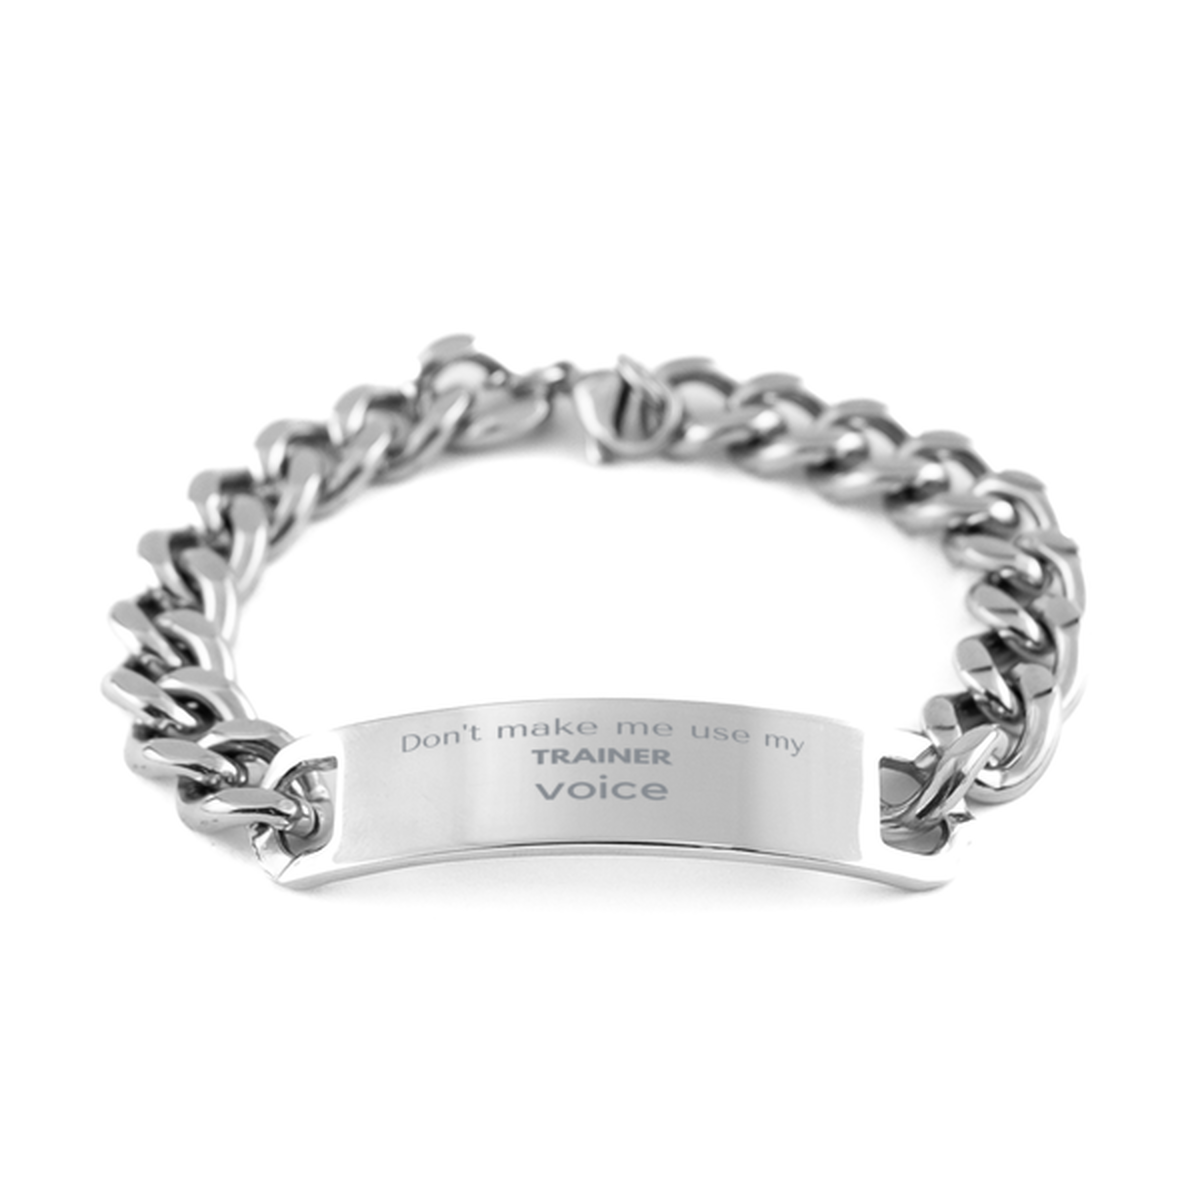 Don't make me use my Trainer voice, Sarcasm Trainer Gifts, Christmas Trainer Cuban Chain Stainless Steel Bracelet Birthday Unique Gifts For Trainer Coworkers, Men, Women, Colleague, Friends